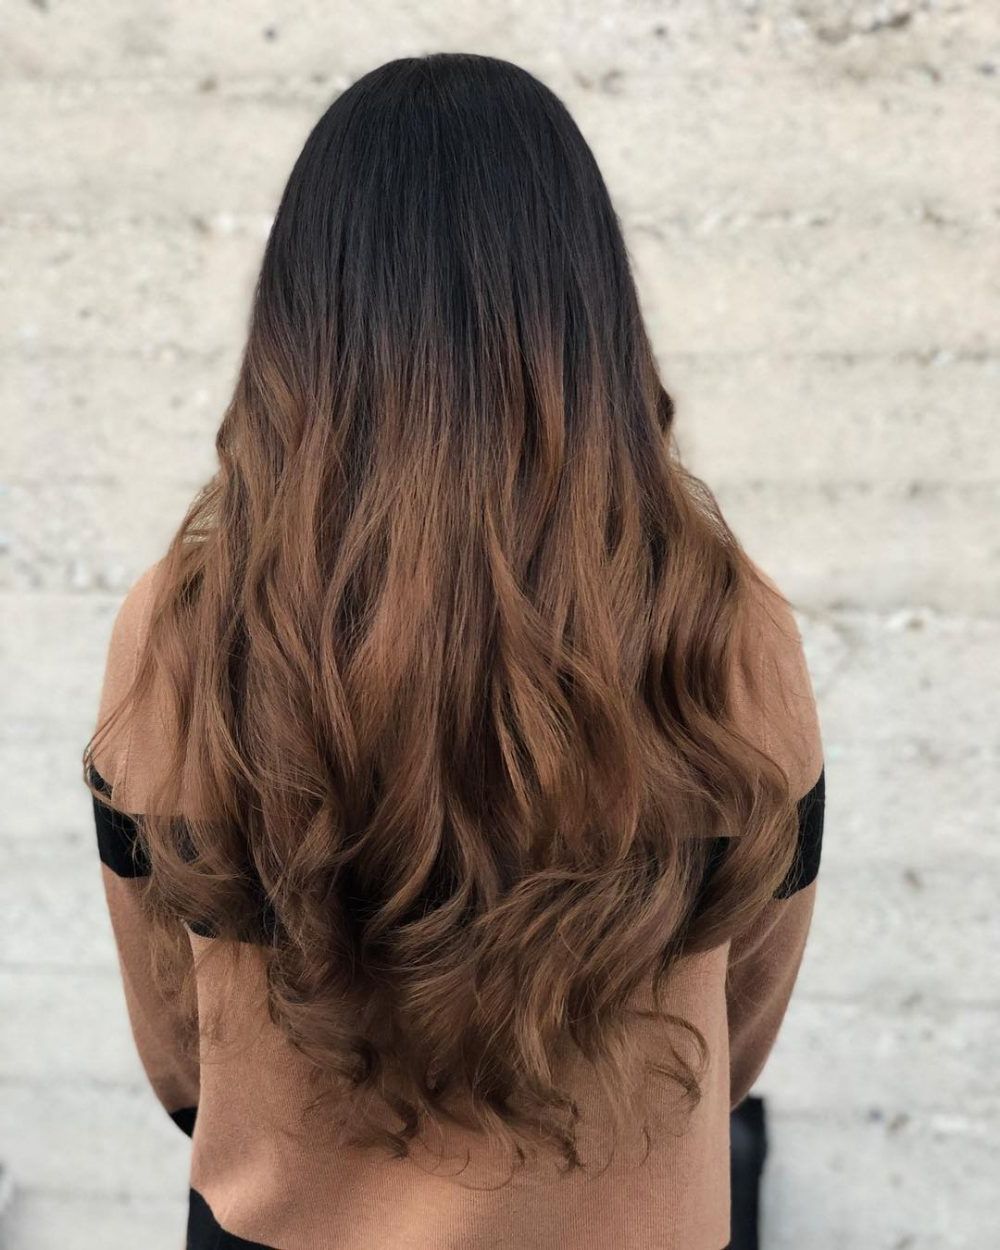 23 Long Ombre Hair Ideas Blowing Up In 2019 Intended For Trendy Long Layered Ombre Hairstyles (Gallery 19 of 20)